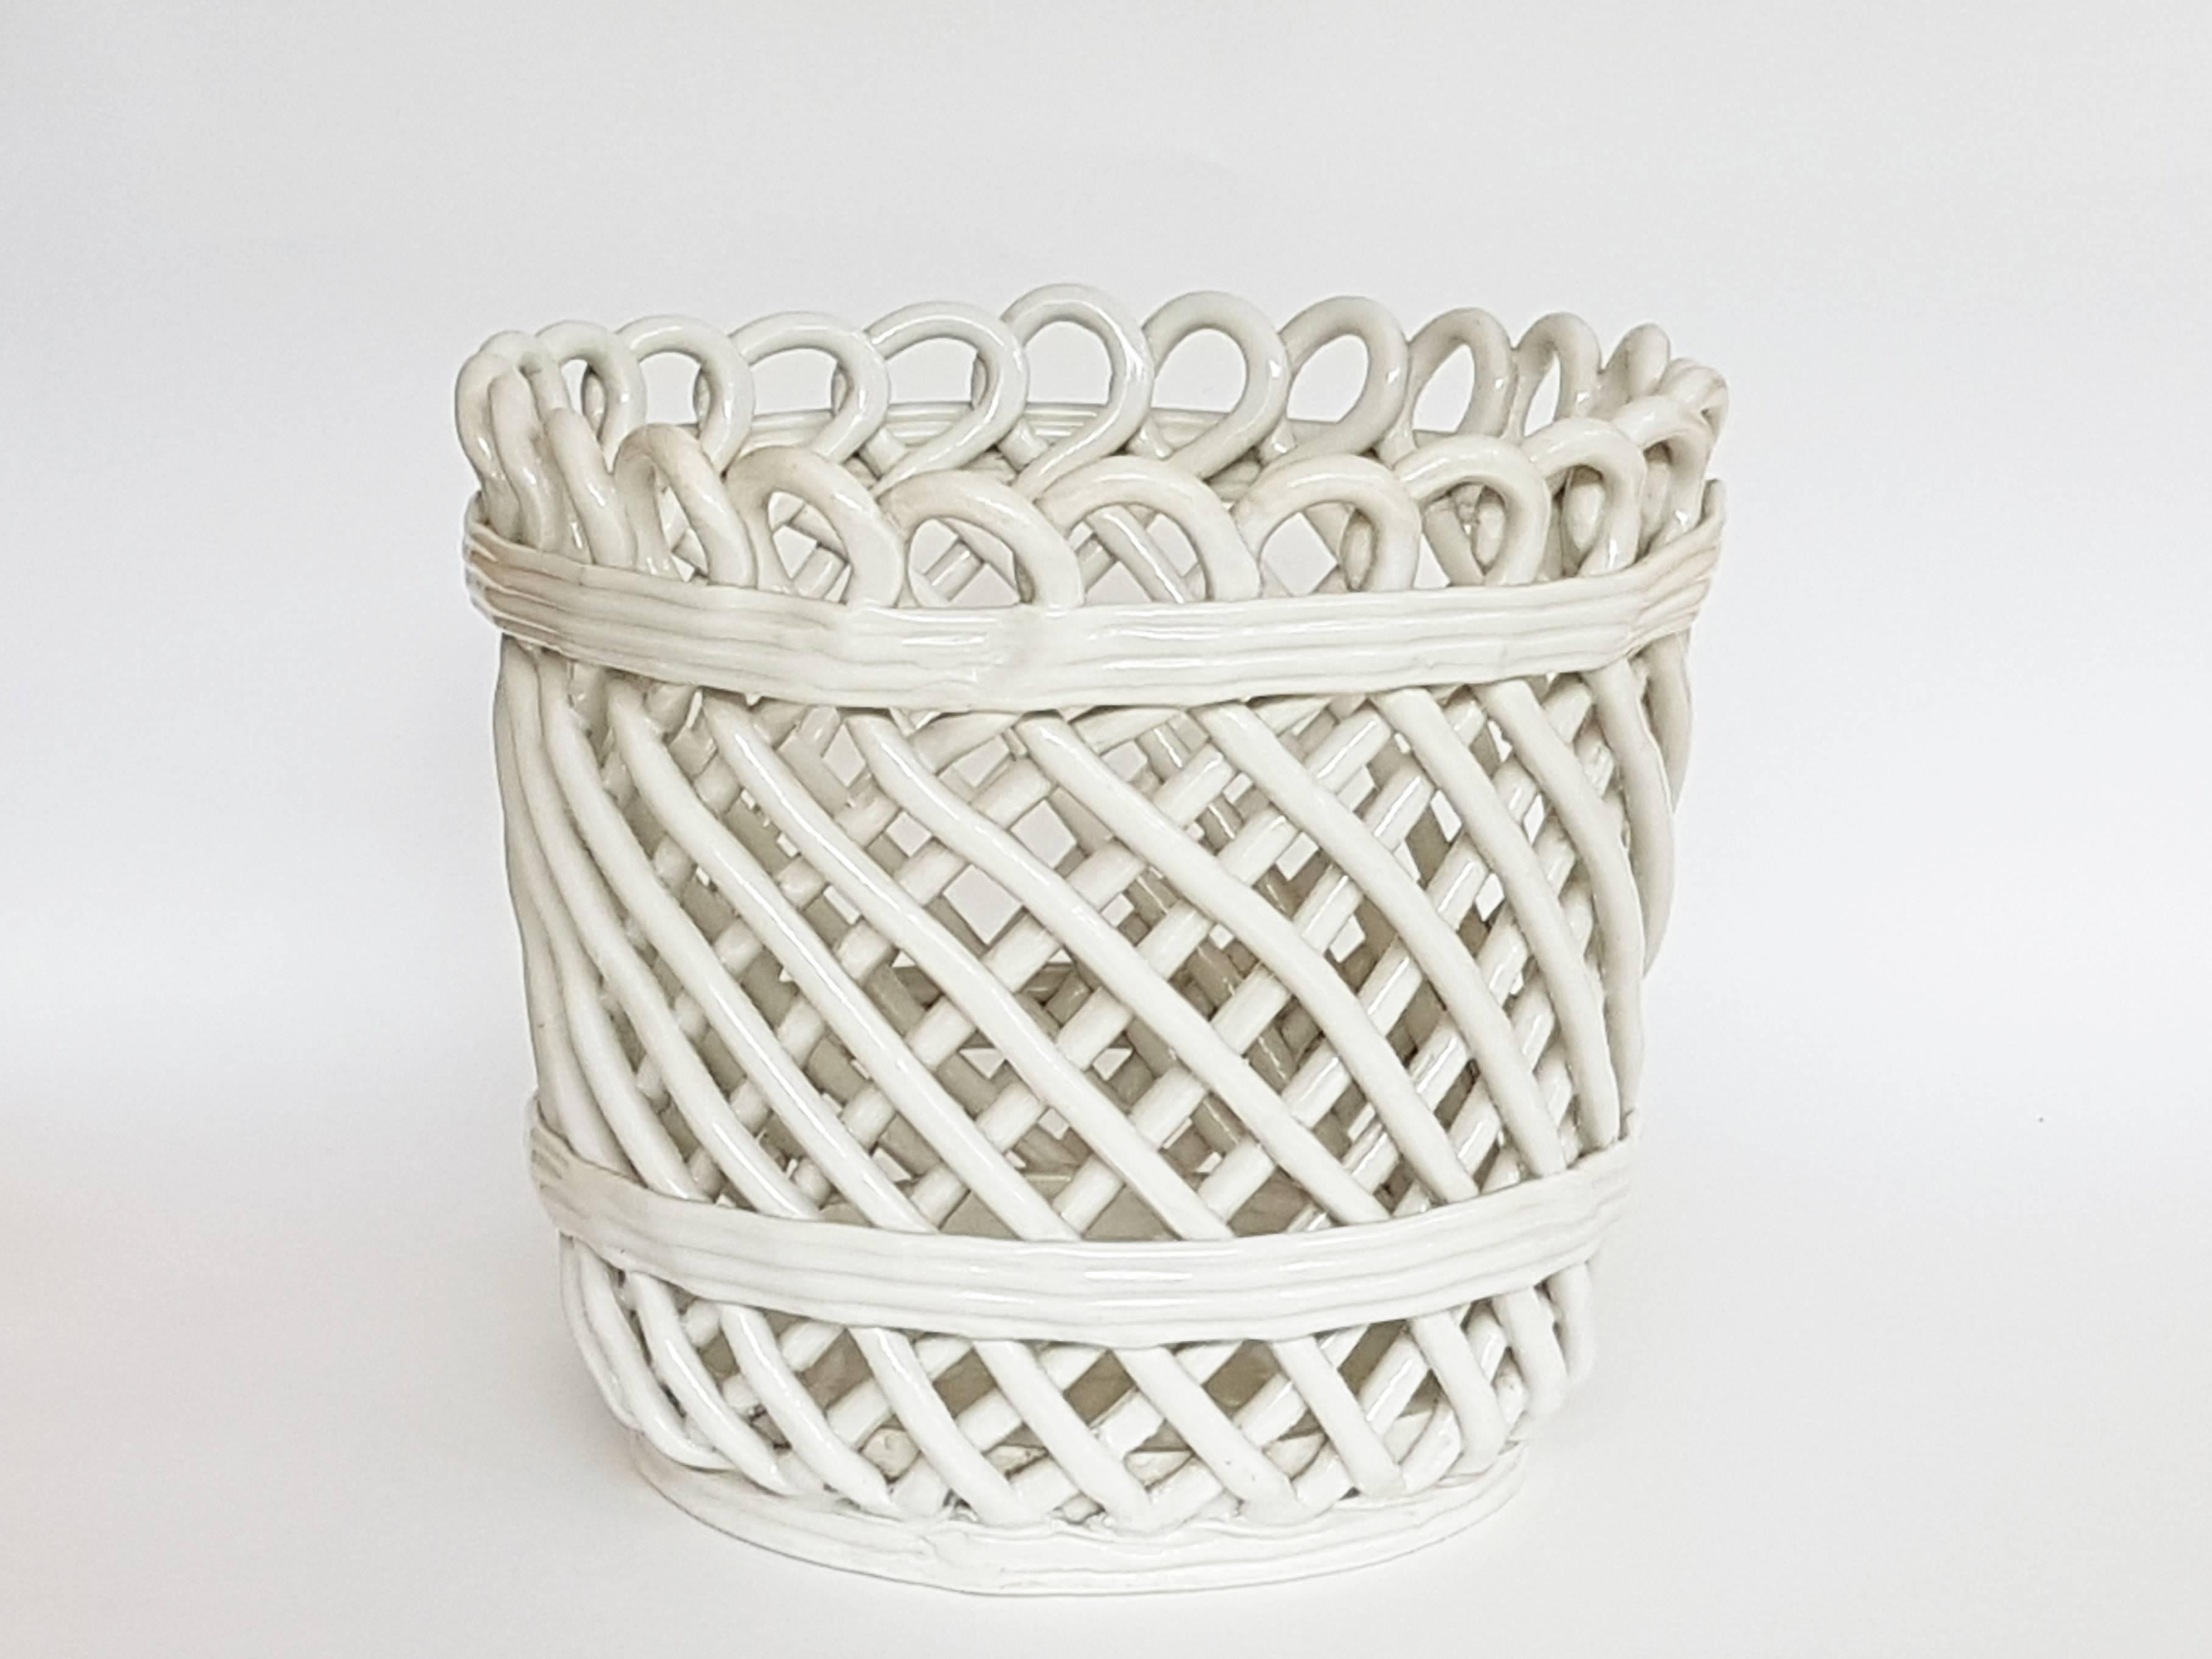 This basket shape ceramic cachepot was manufactured in Italy by SCI (Società Ceramica Italiana) Laveno, circa 1950. It was made from white glazed ceramic and remains in a very good vintage condition: wear consistent with age and use such as the few